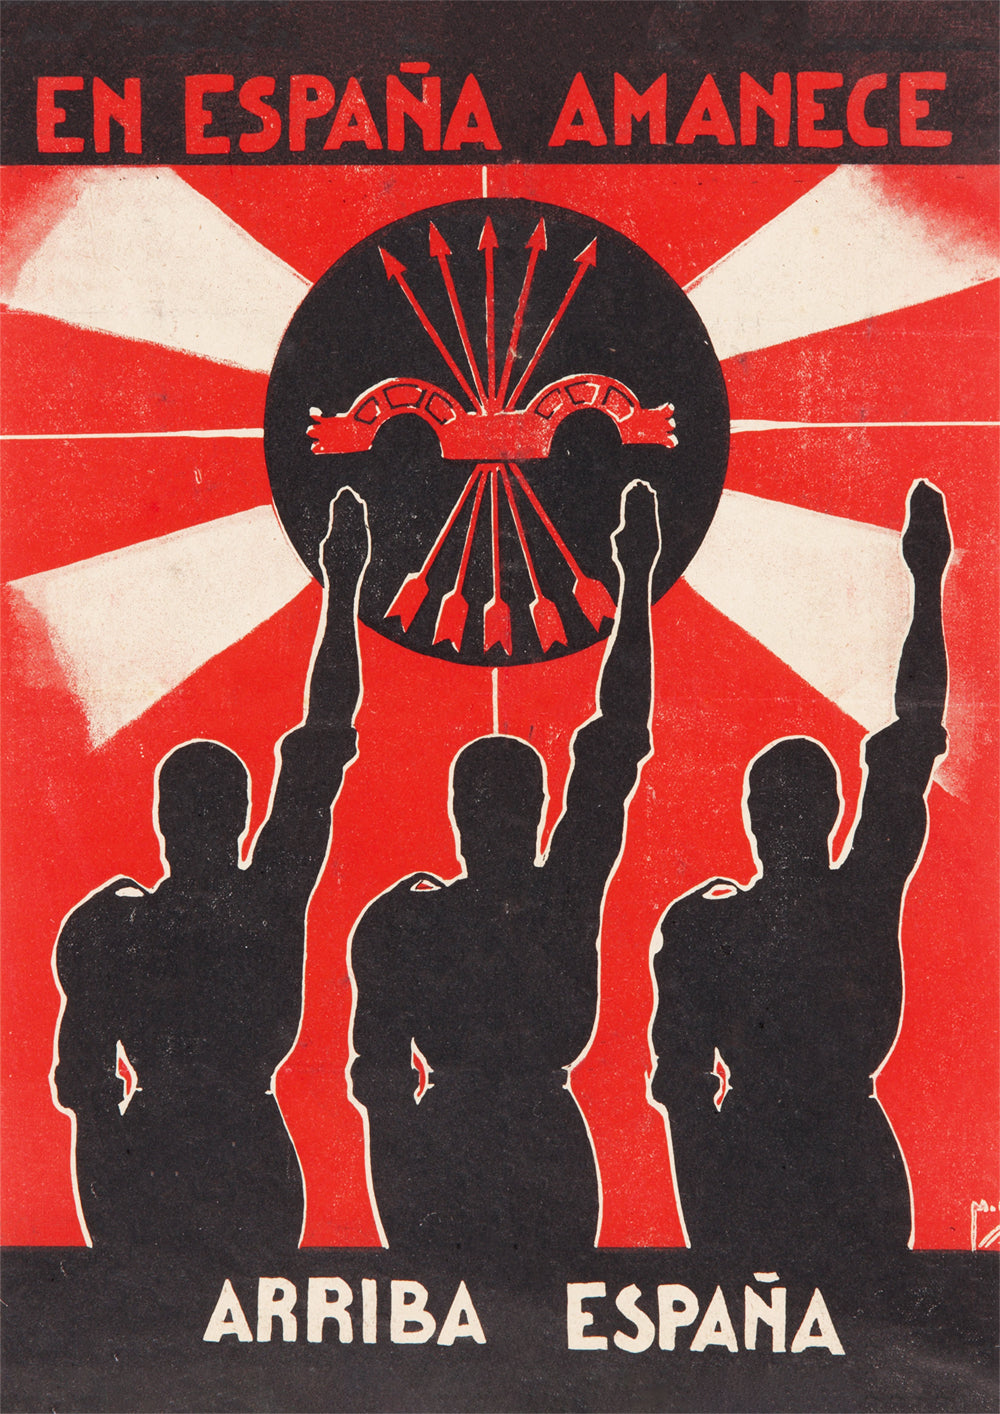 In Spain it is dawning – Spanish Civil War poster